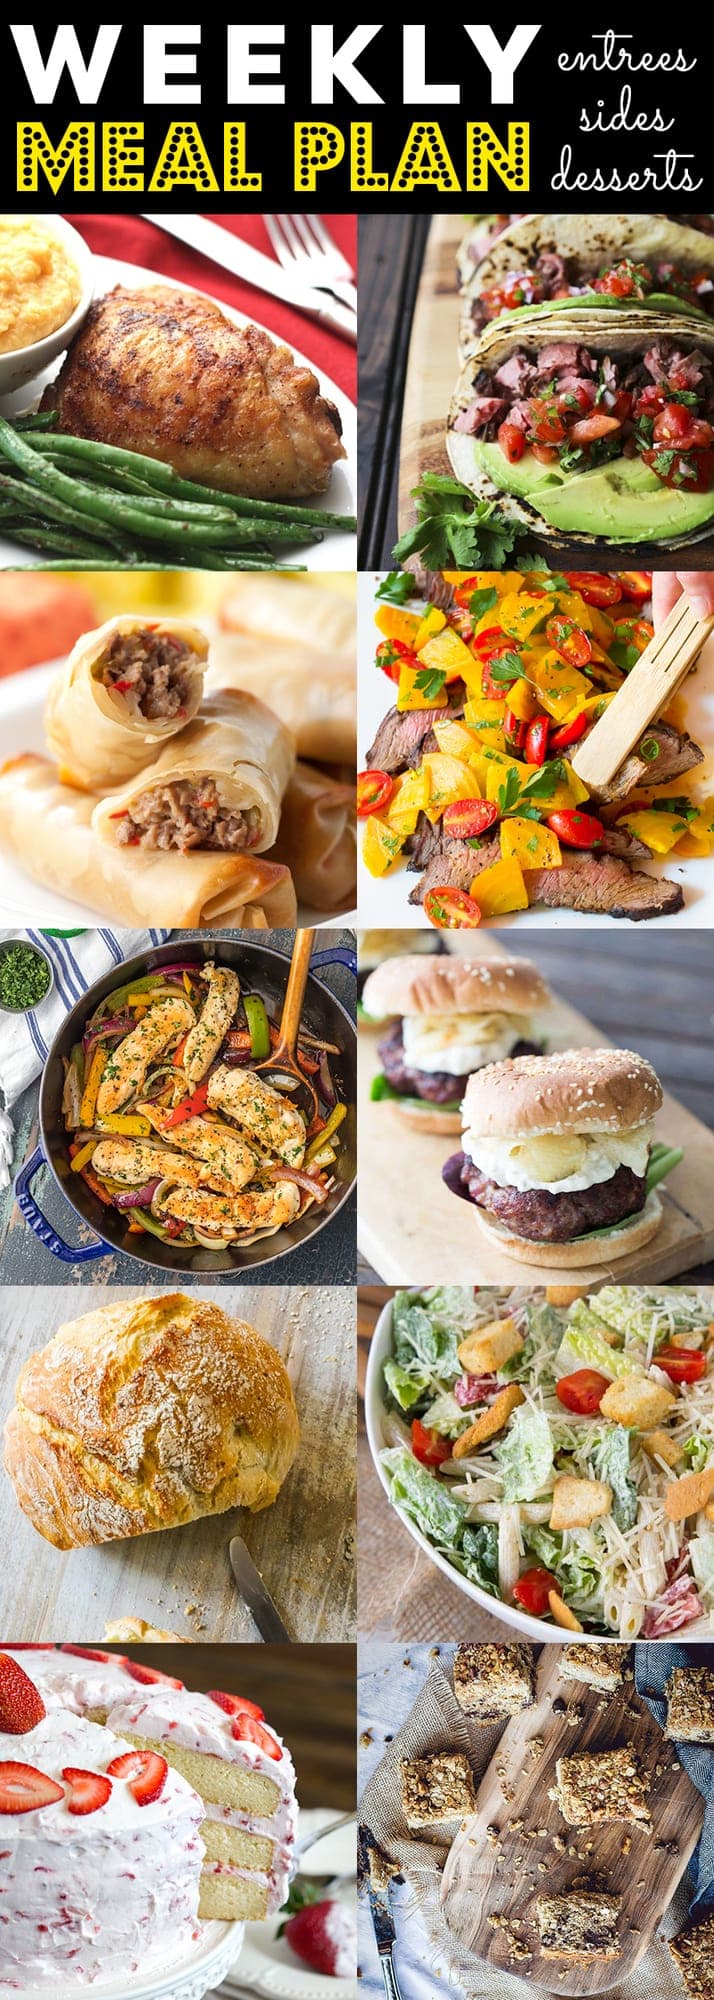 Weekly Meal Plan #68 | Recipes from 10 Great Food Bloggers